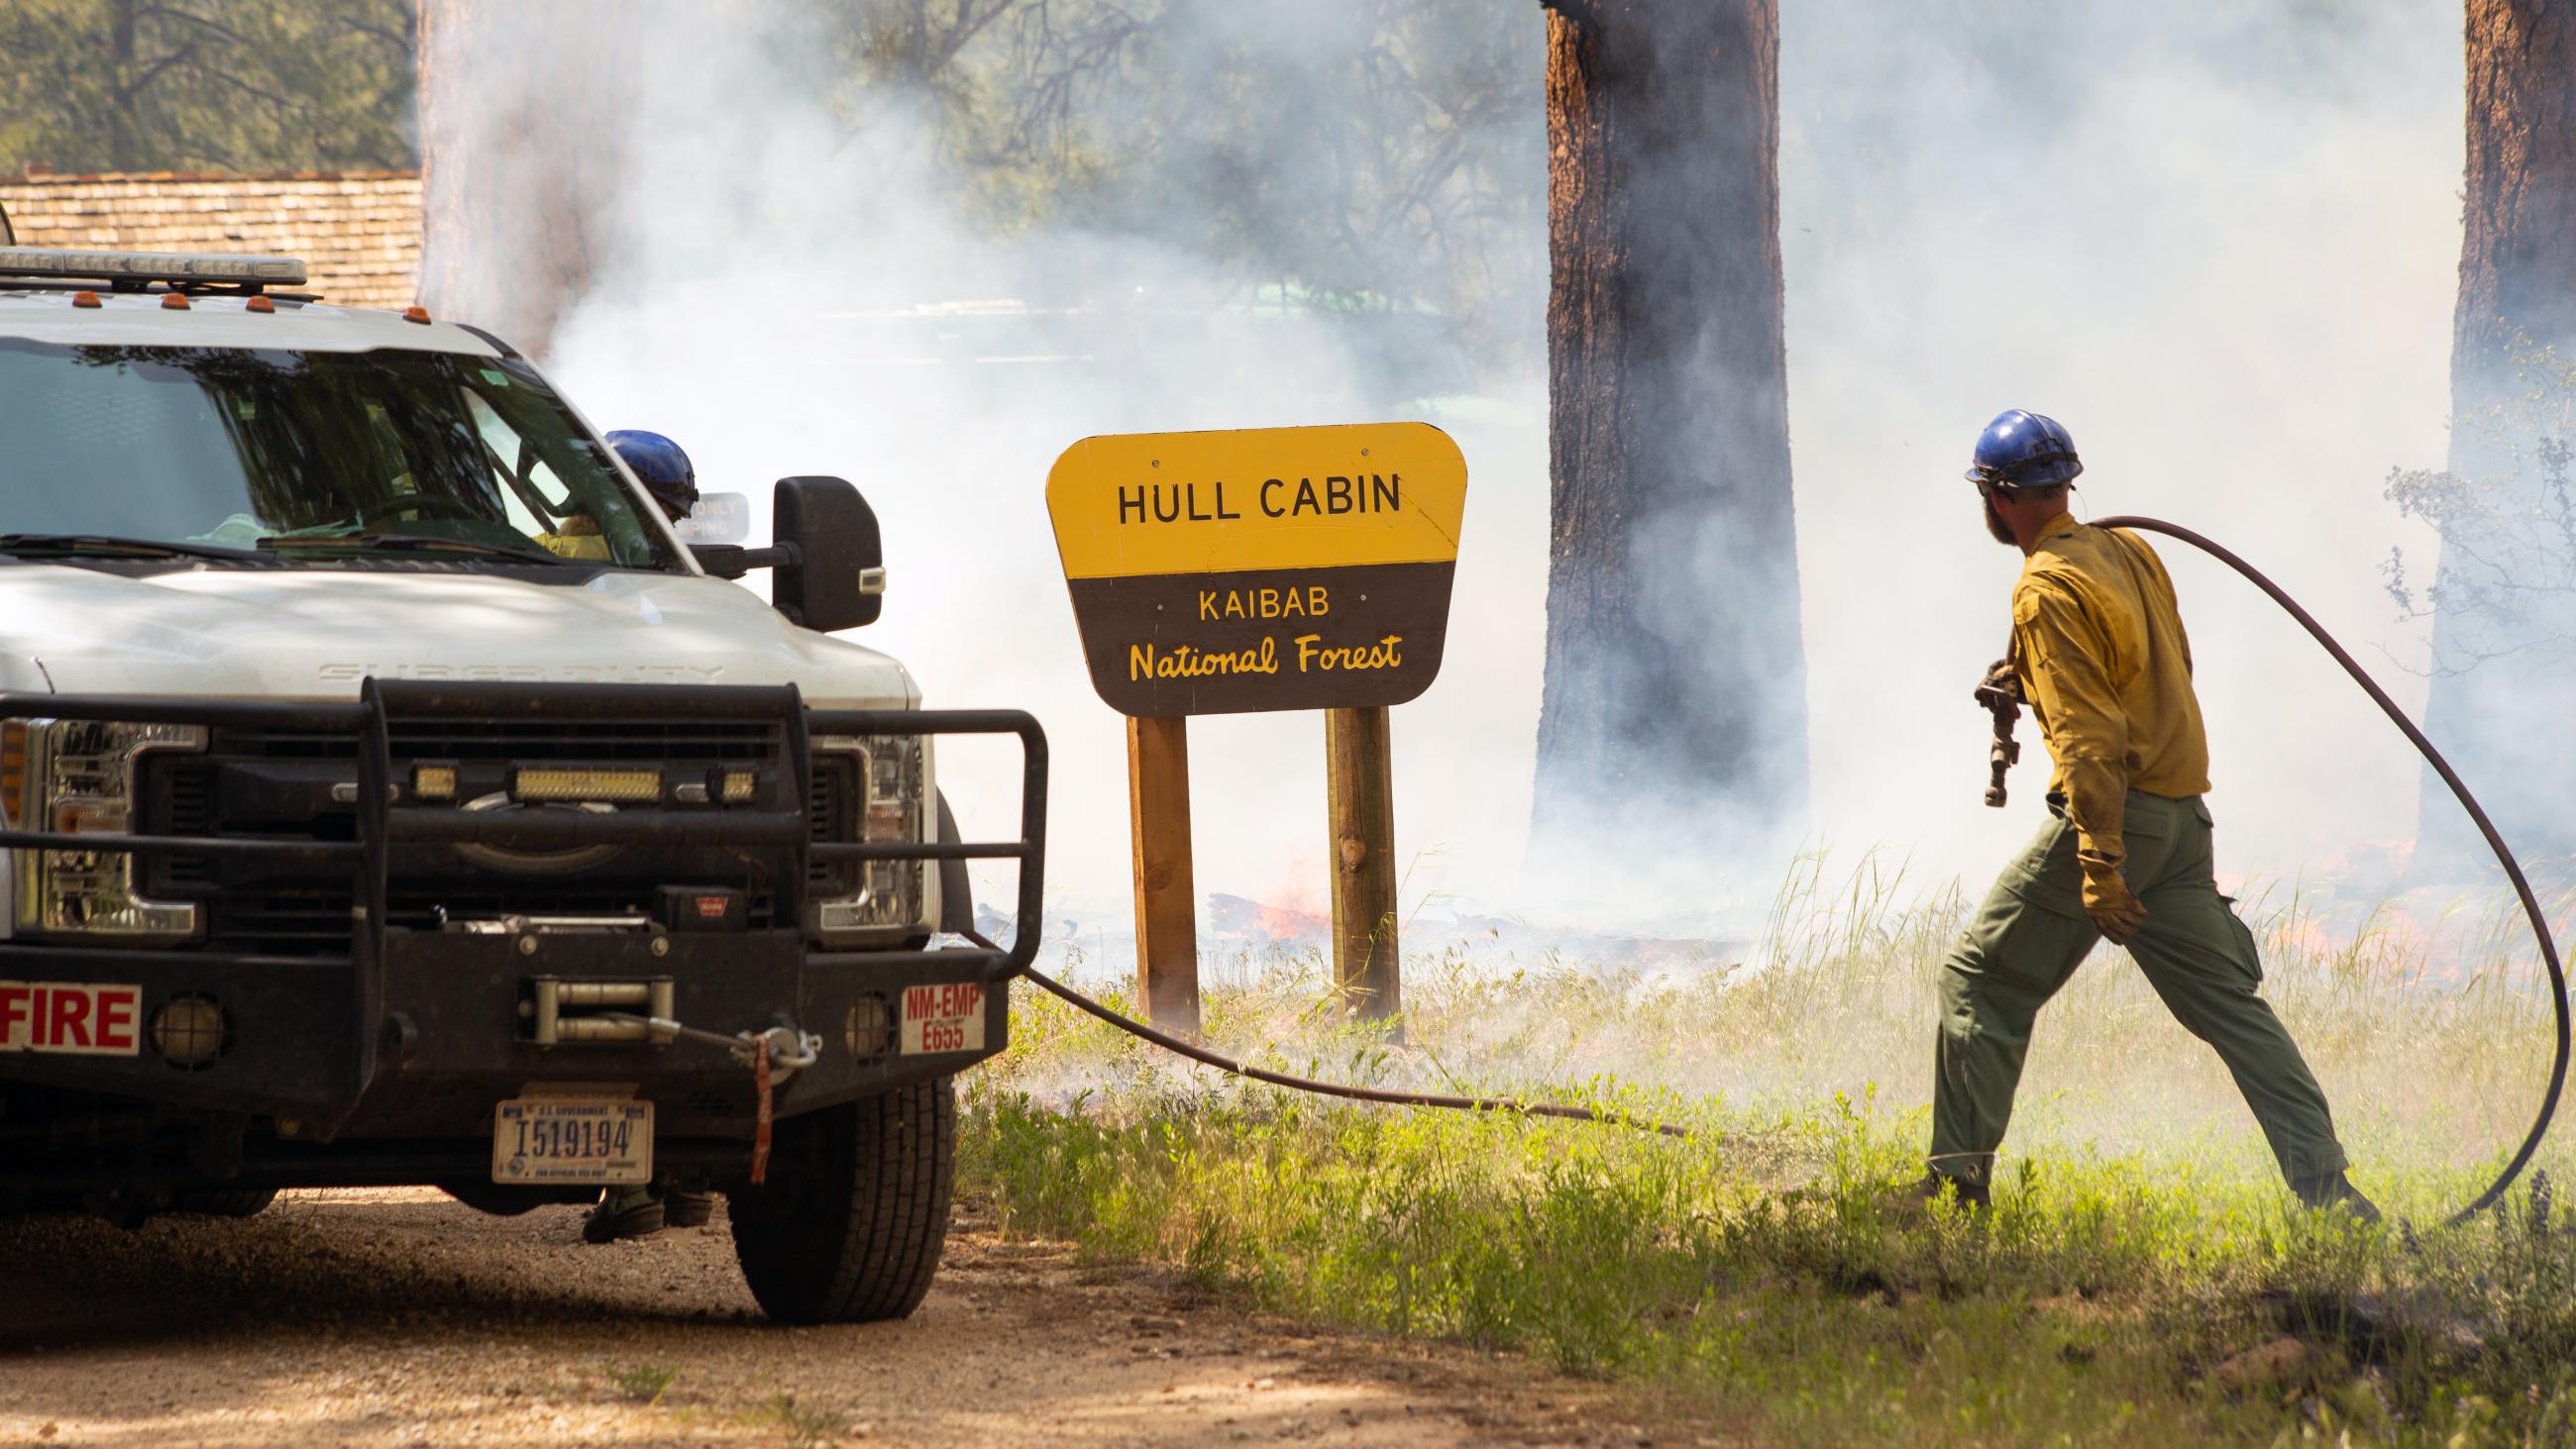 A wildland firefighter carries a hose to an engine in front of the Hull Cabin sign while smoke billows in the background